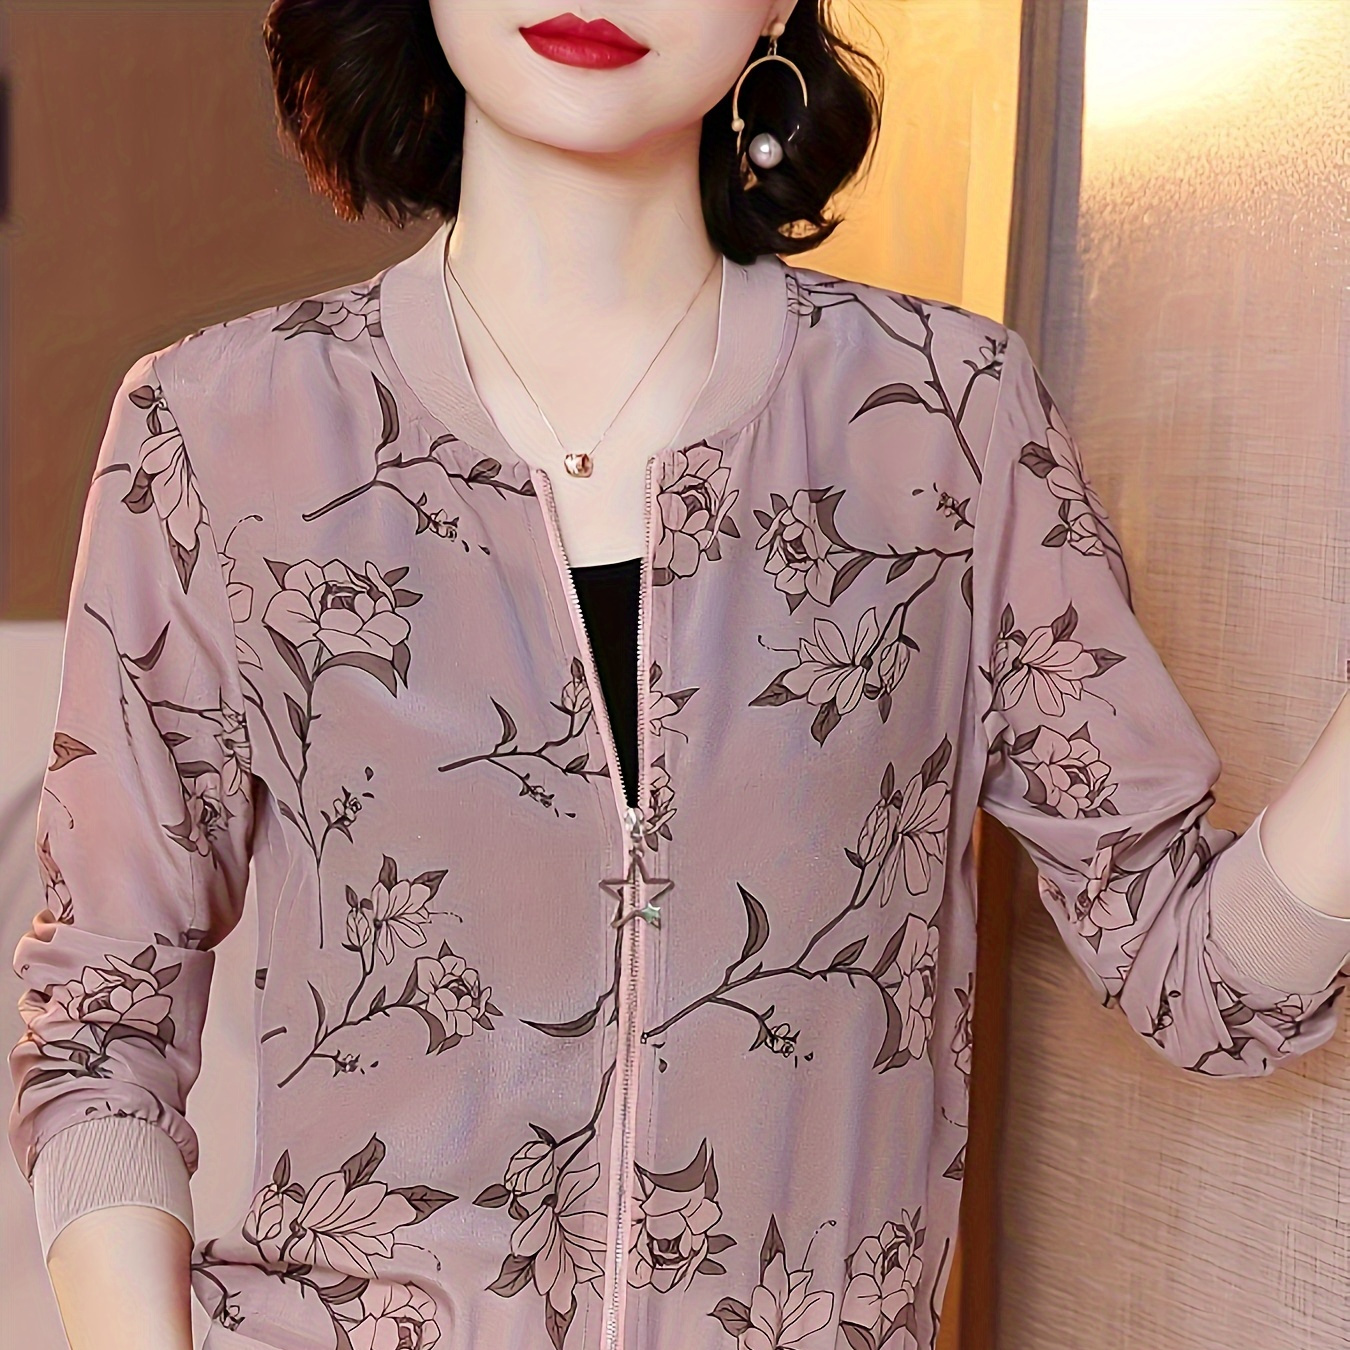 

Floral Print Zip Up Lightweight Jacket, Casual Long Sleeve Baseball Collar Outerwear For Spring & Summer, Women's Clothing